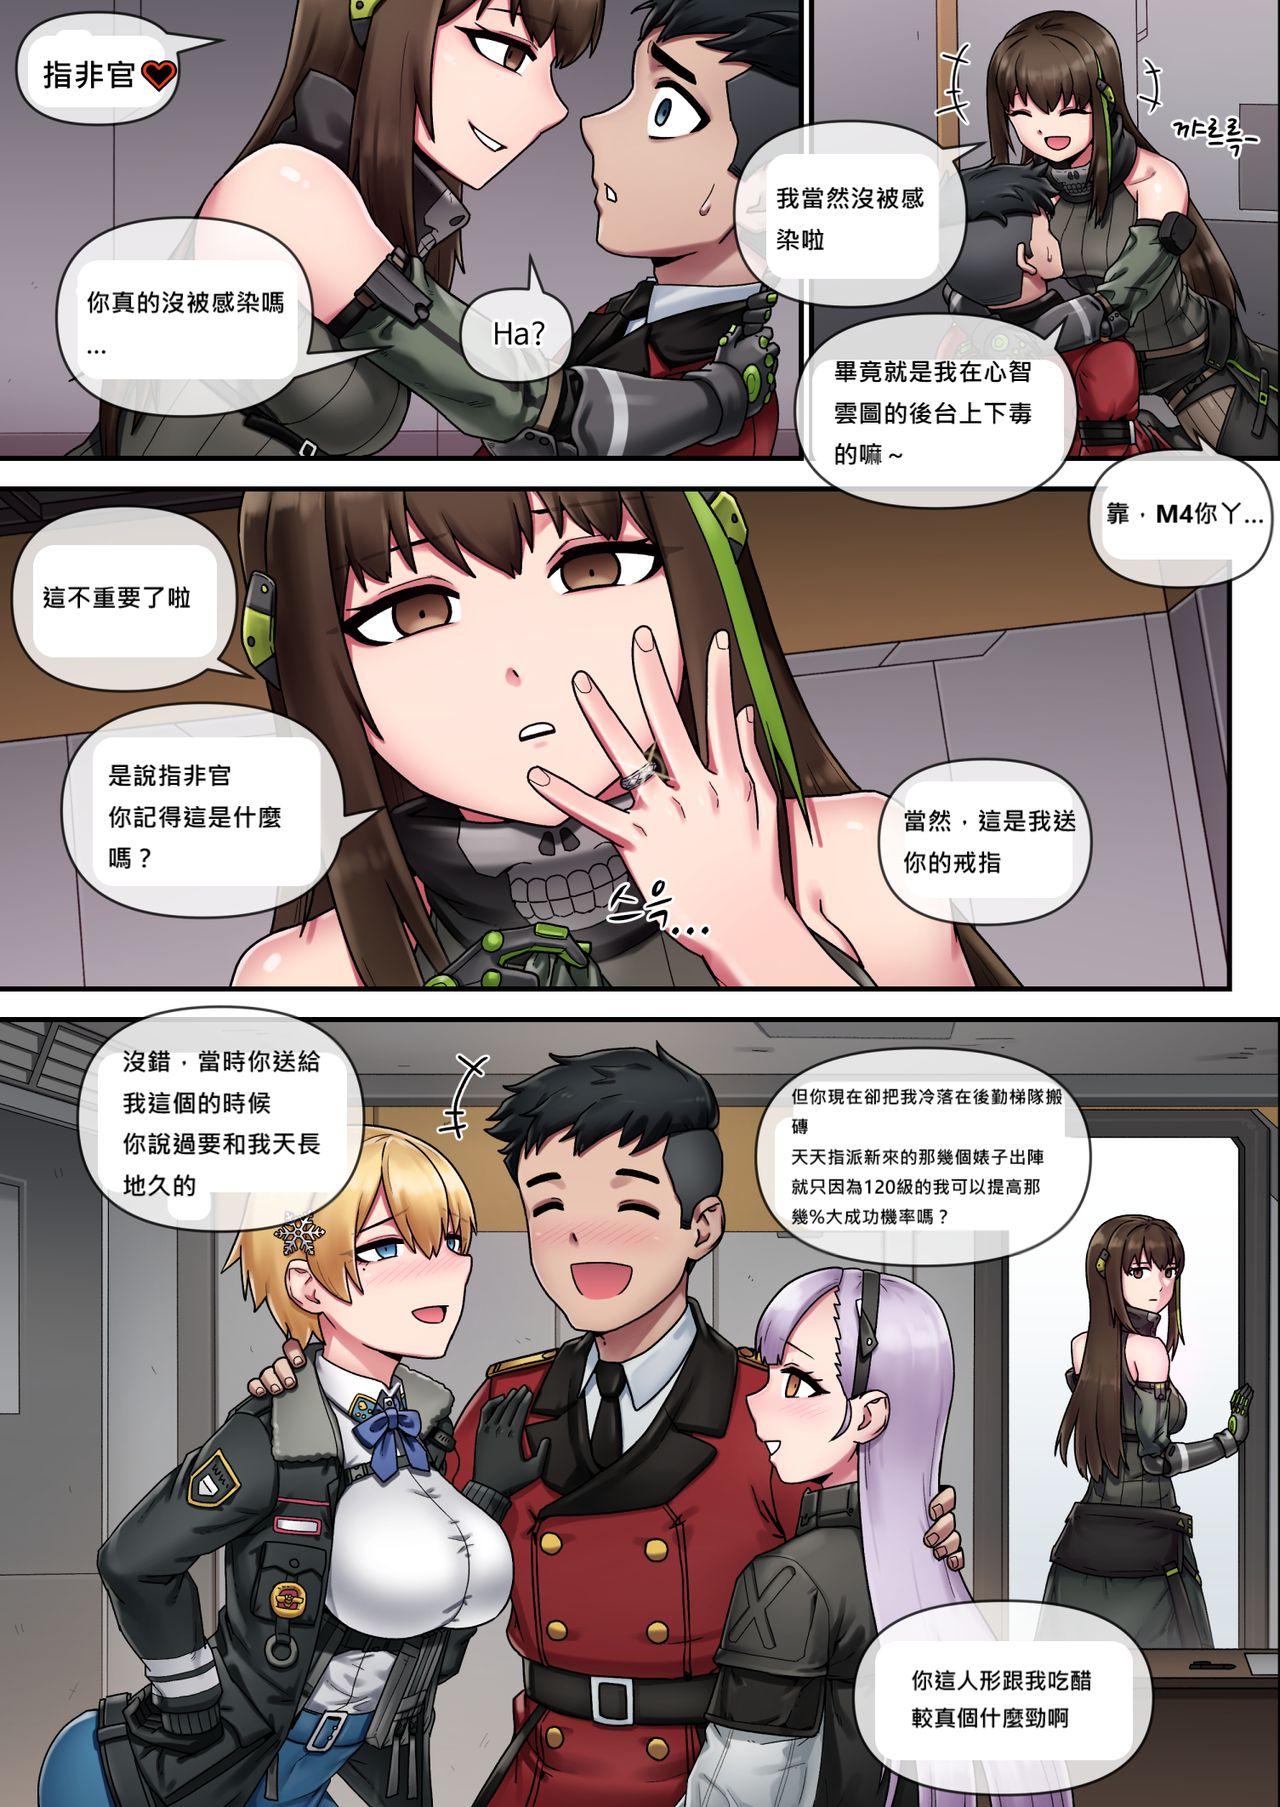 Class Room My Only Princess - Girls frontline Stepsiblings - Page 8